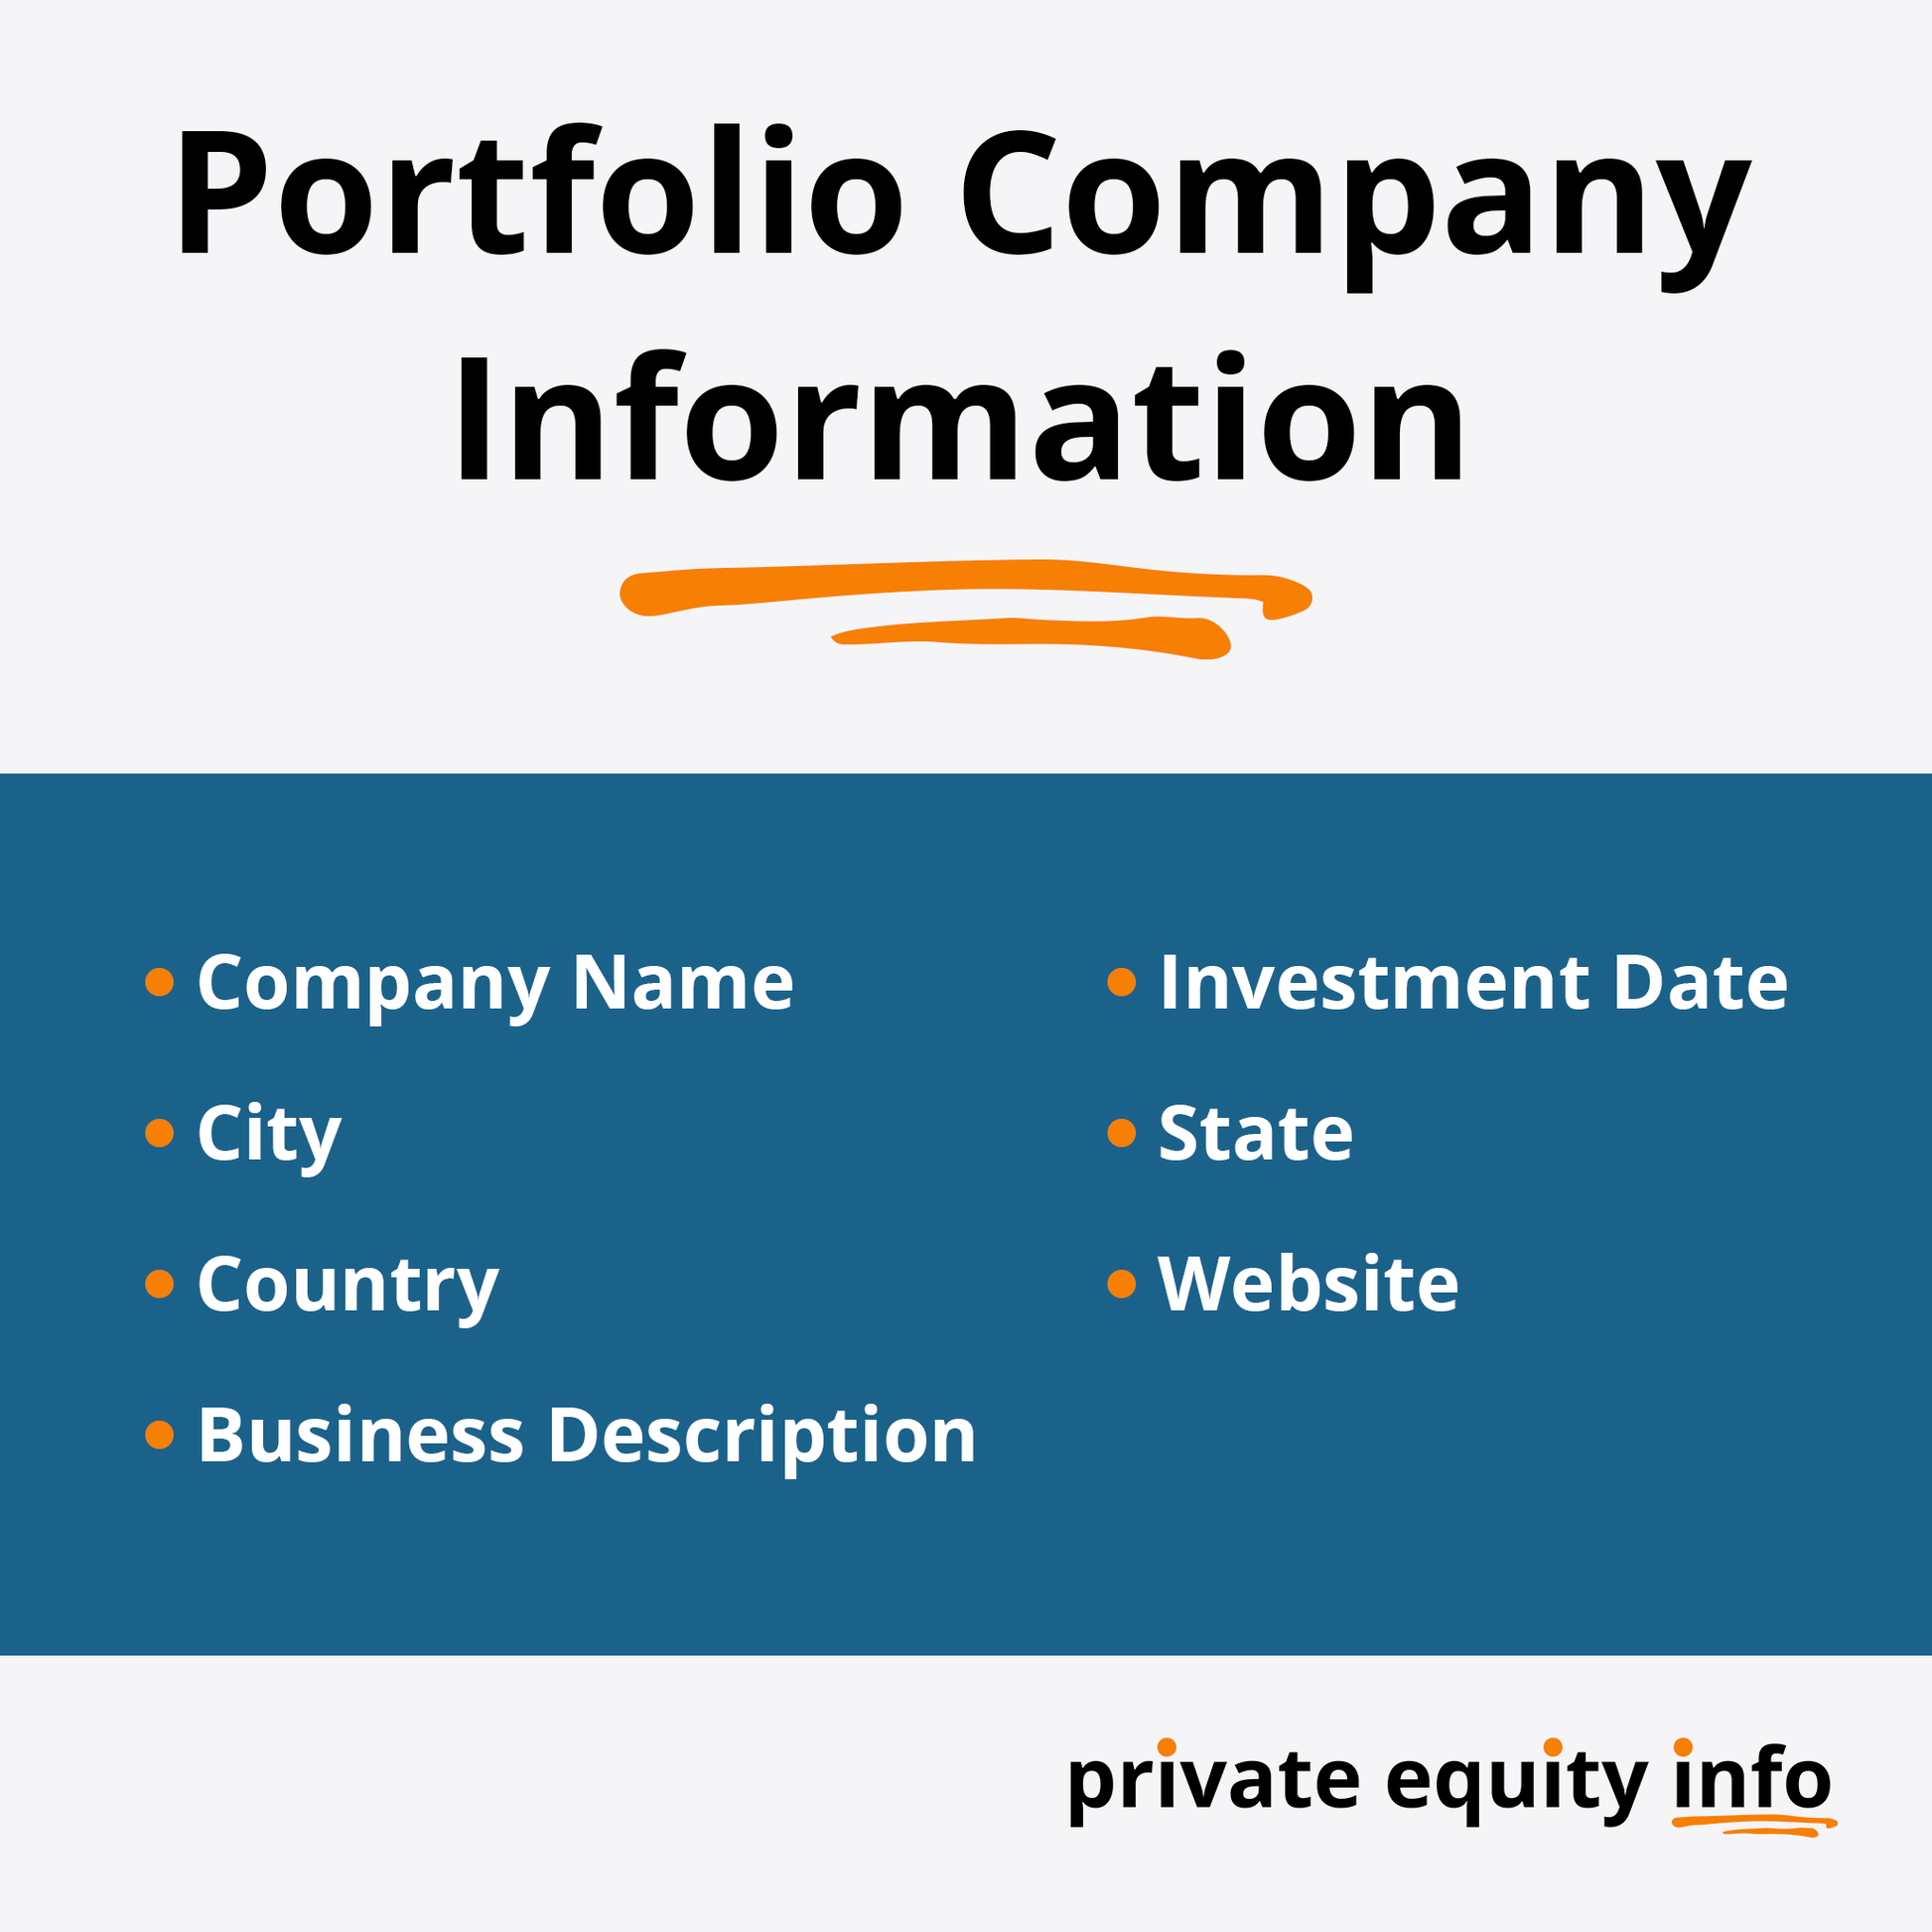 Private equity oil and gas m&A list 